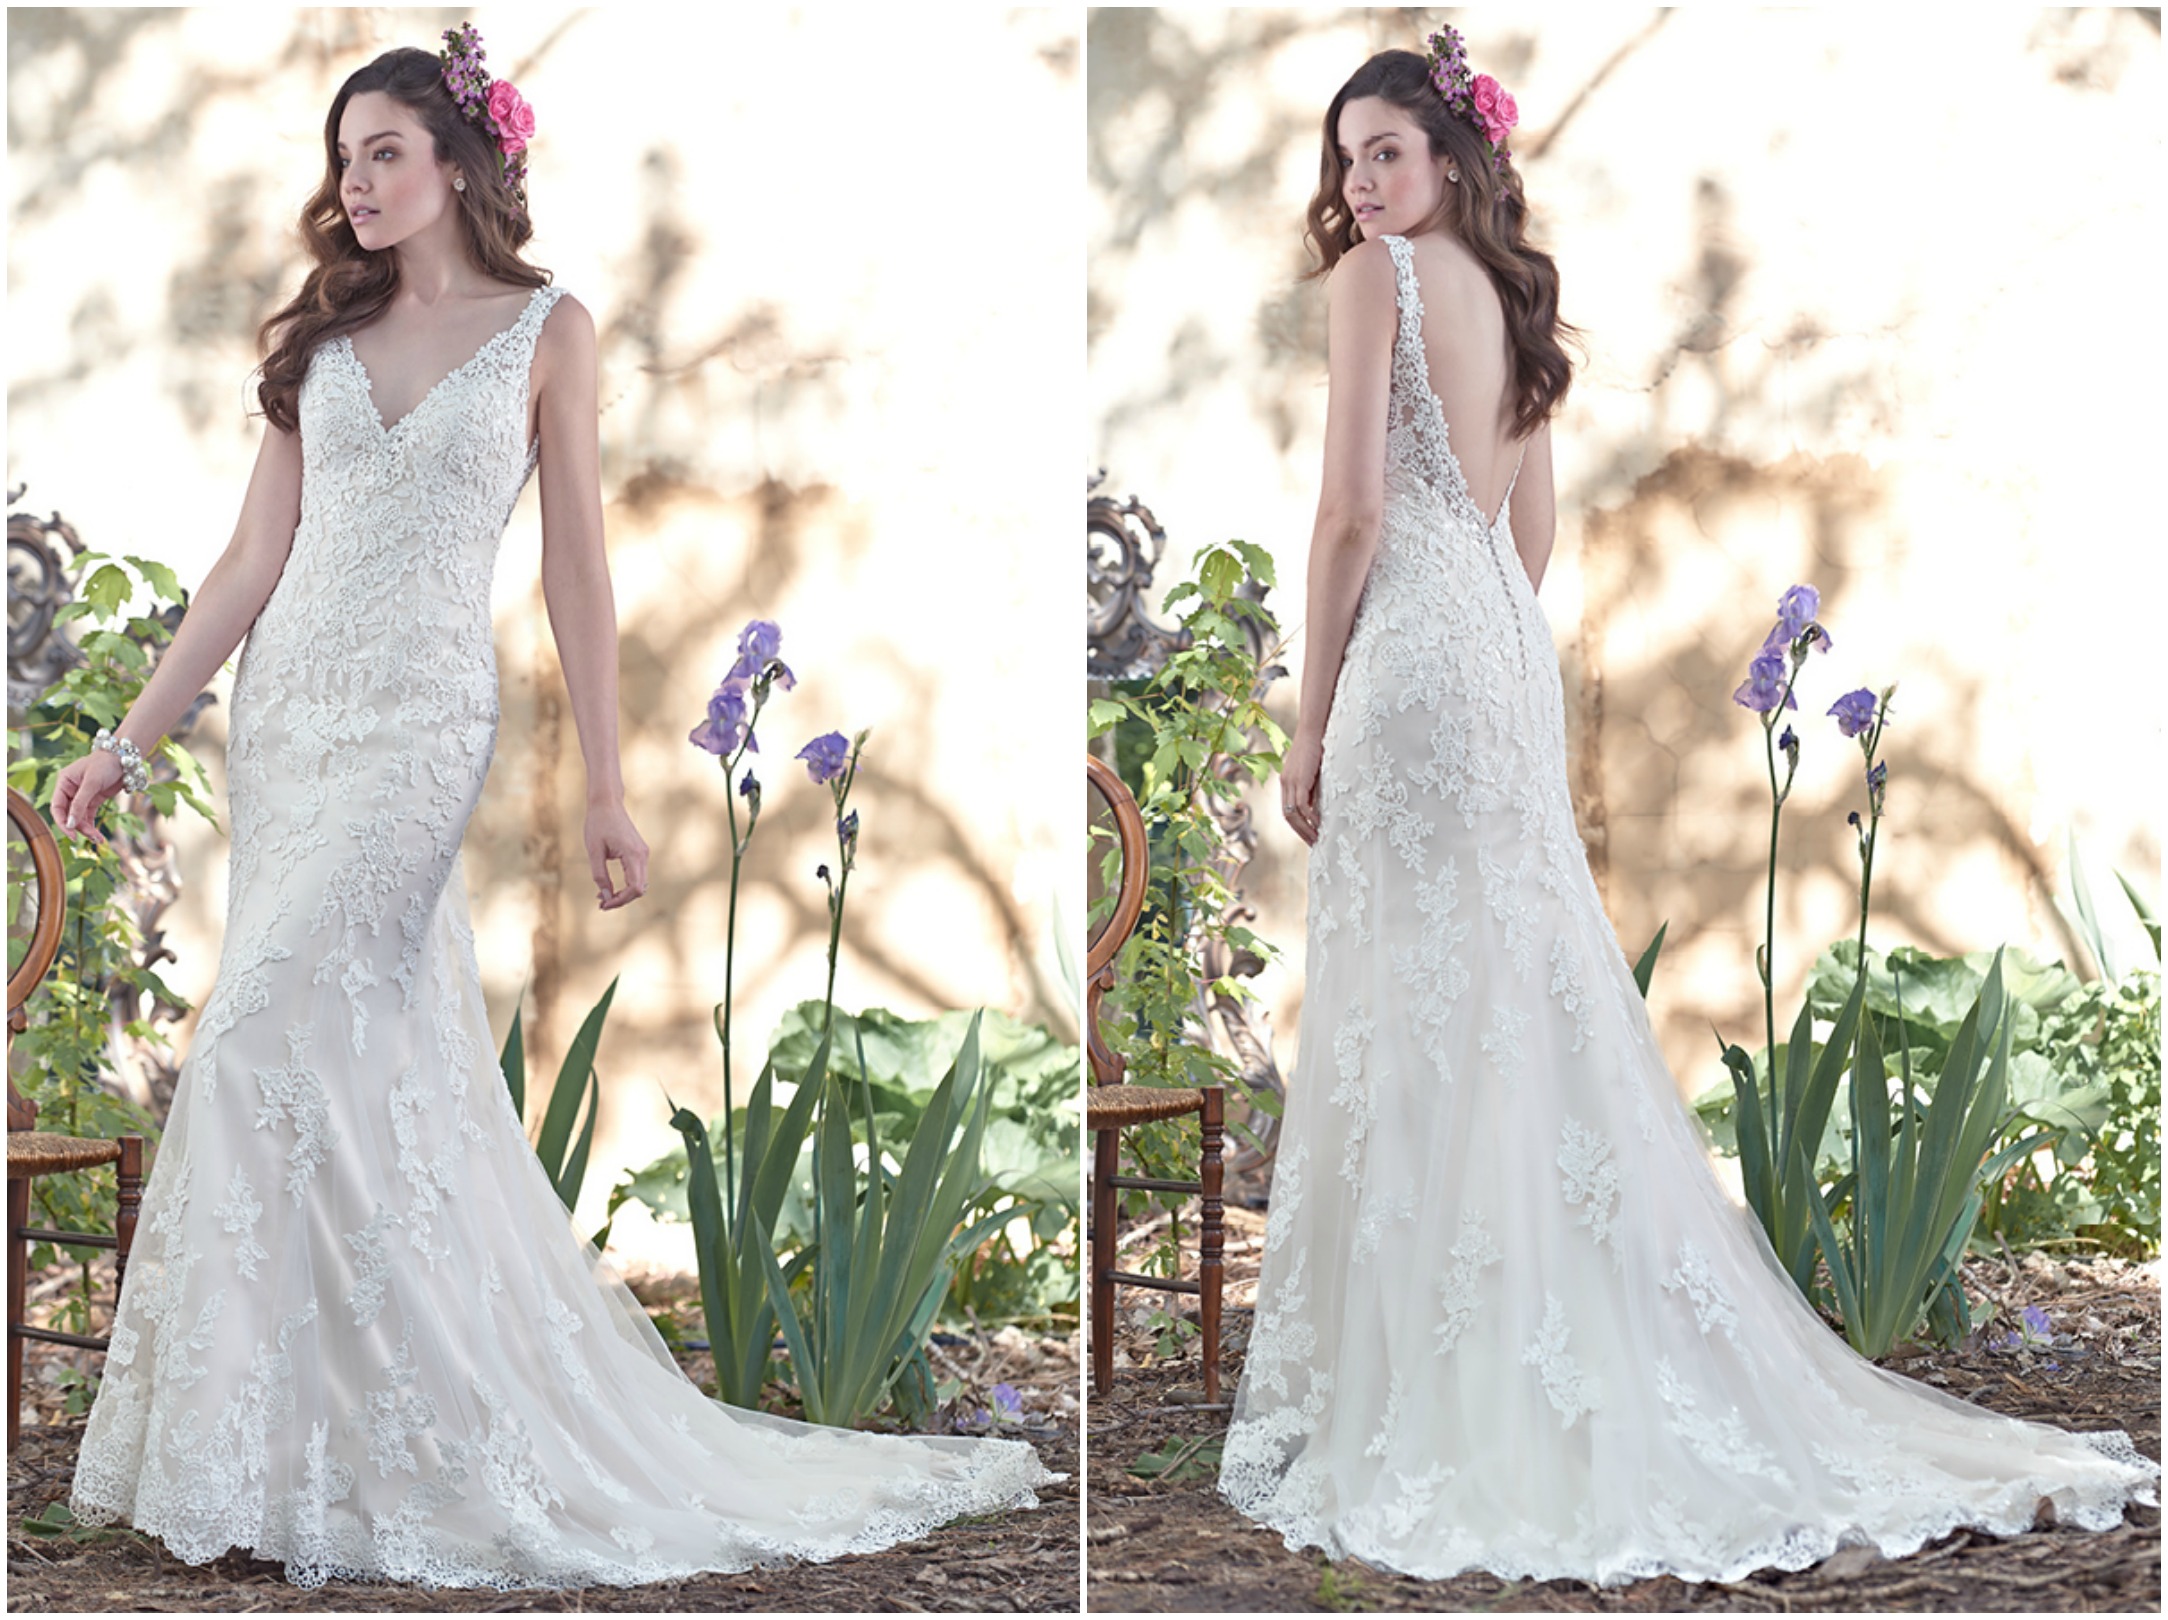 <a href="http://www.maggiesottero.com/maggie-sottero/geddes/9504" target="_blank">Maggie Sottero Spring 2016</a>